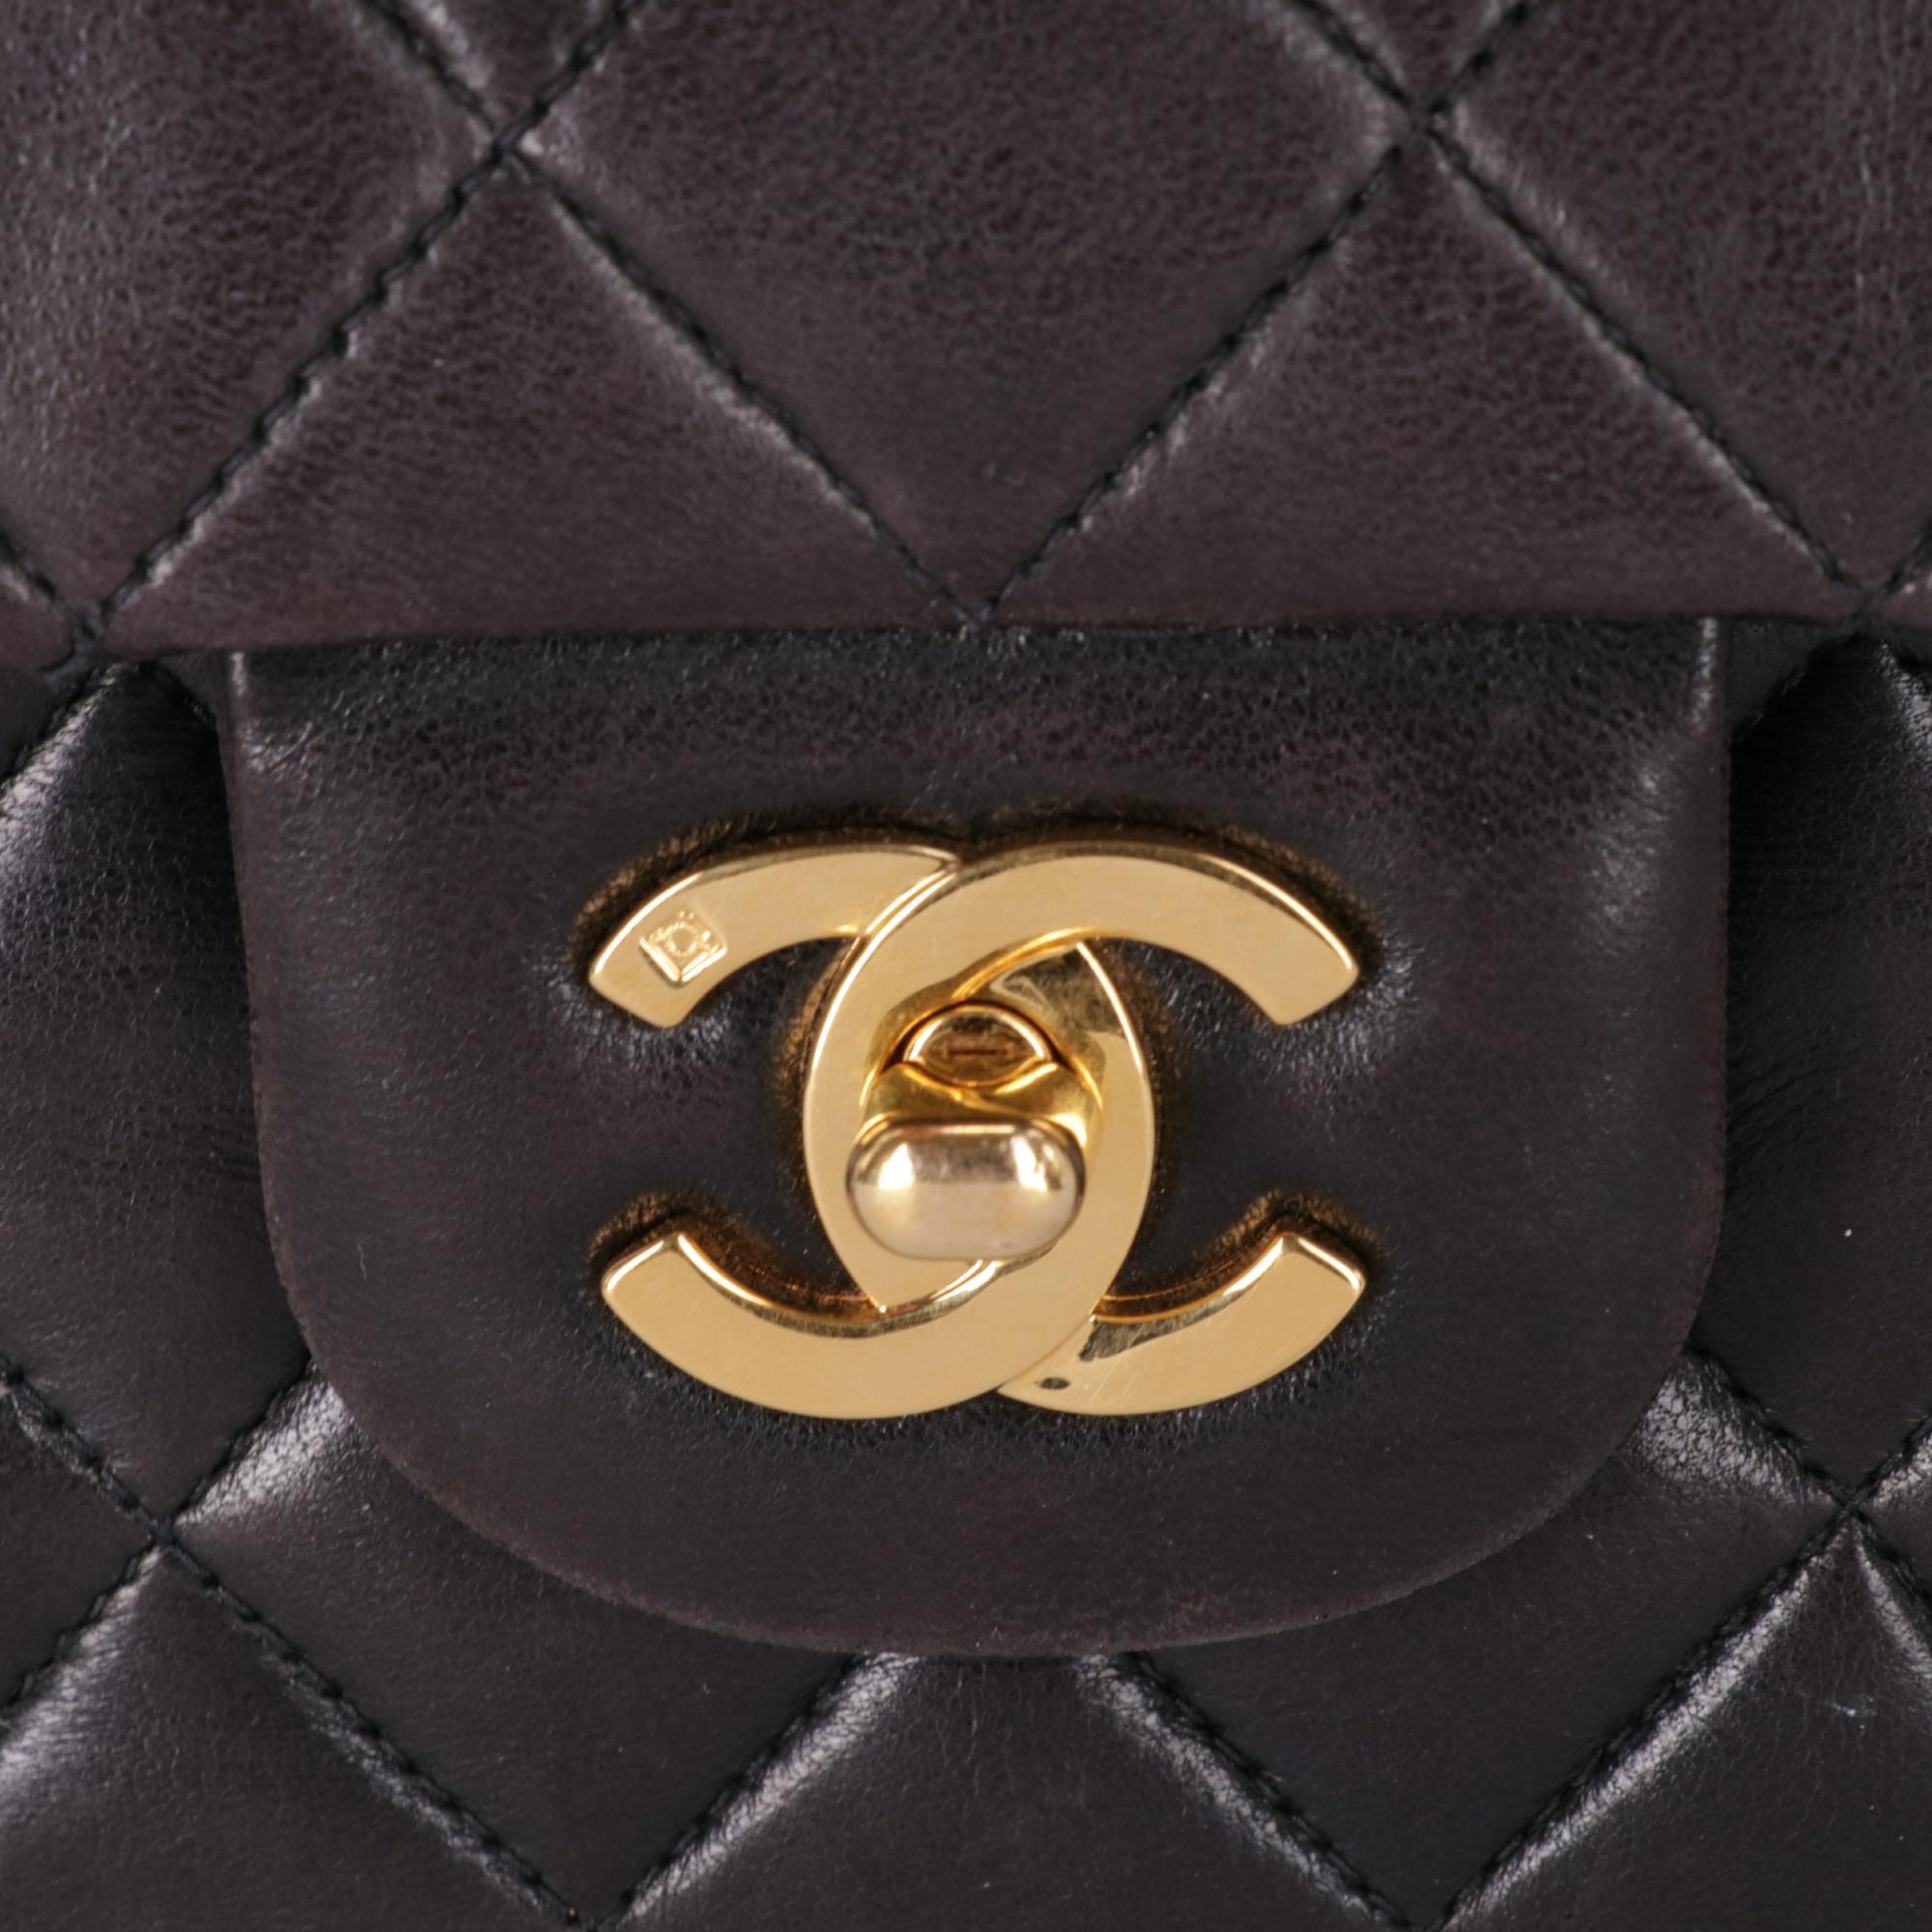 1990s Chanel 2.55 Black Leather Bag 25 cm With Chain 10